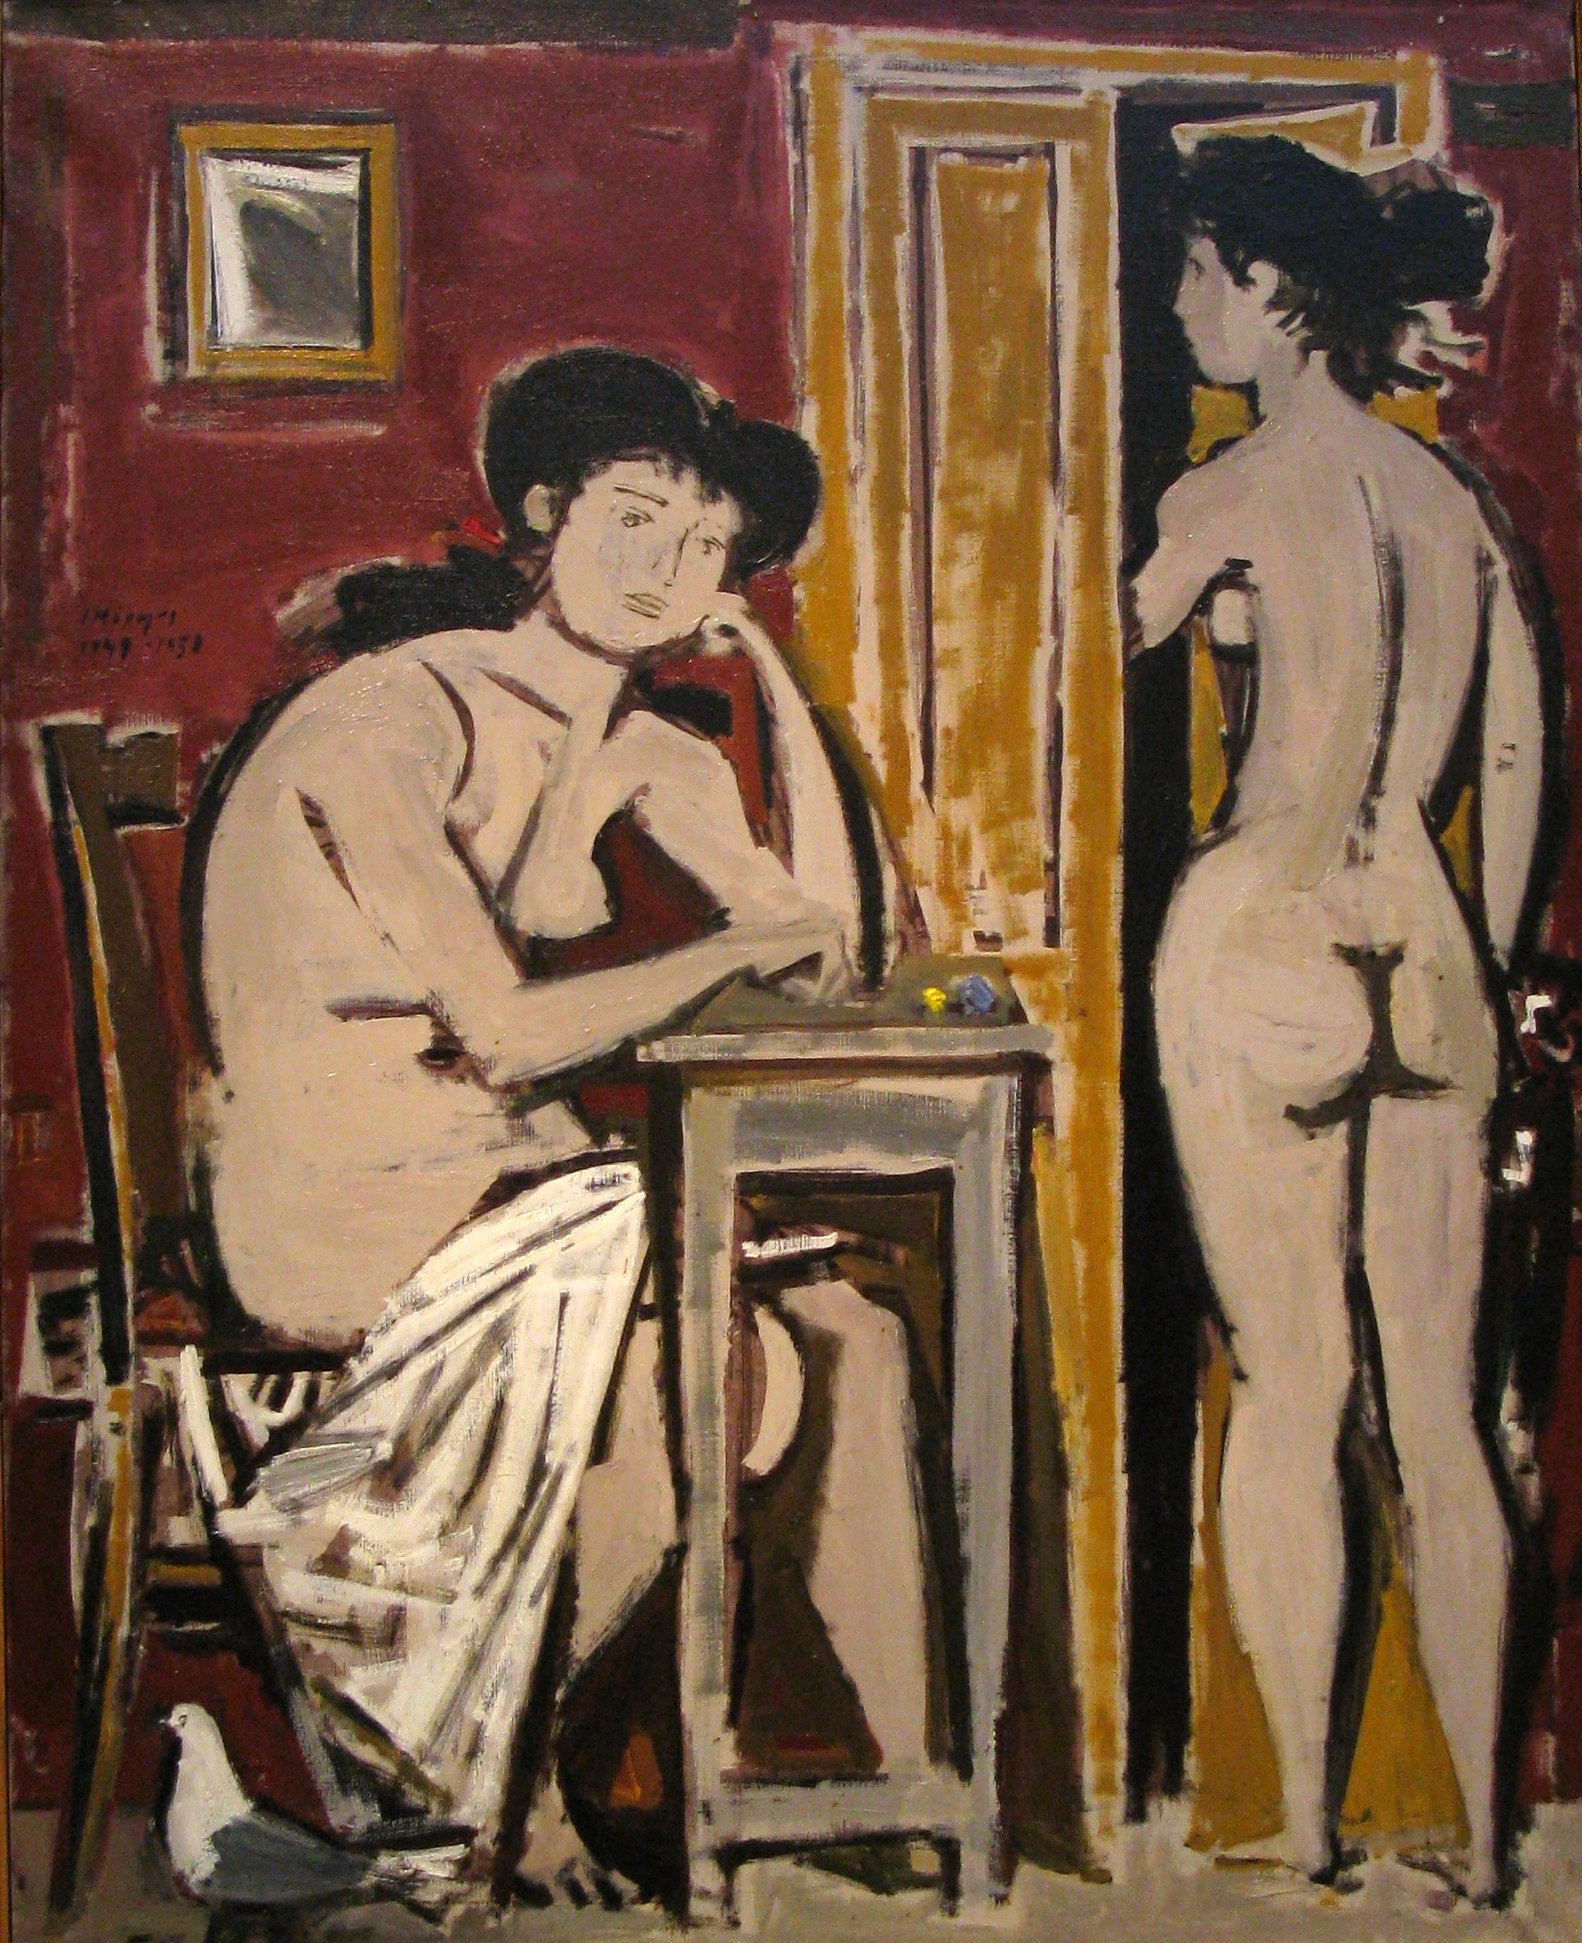 the painting shows two men sitting at a table and one on a chair